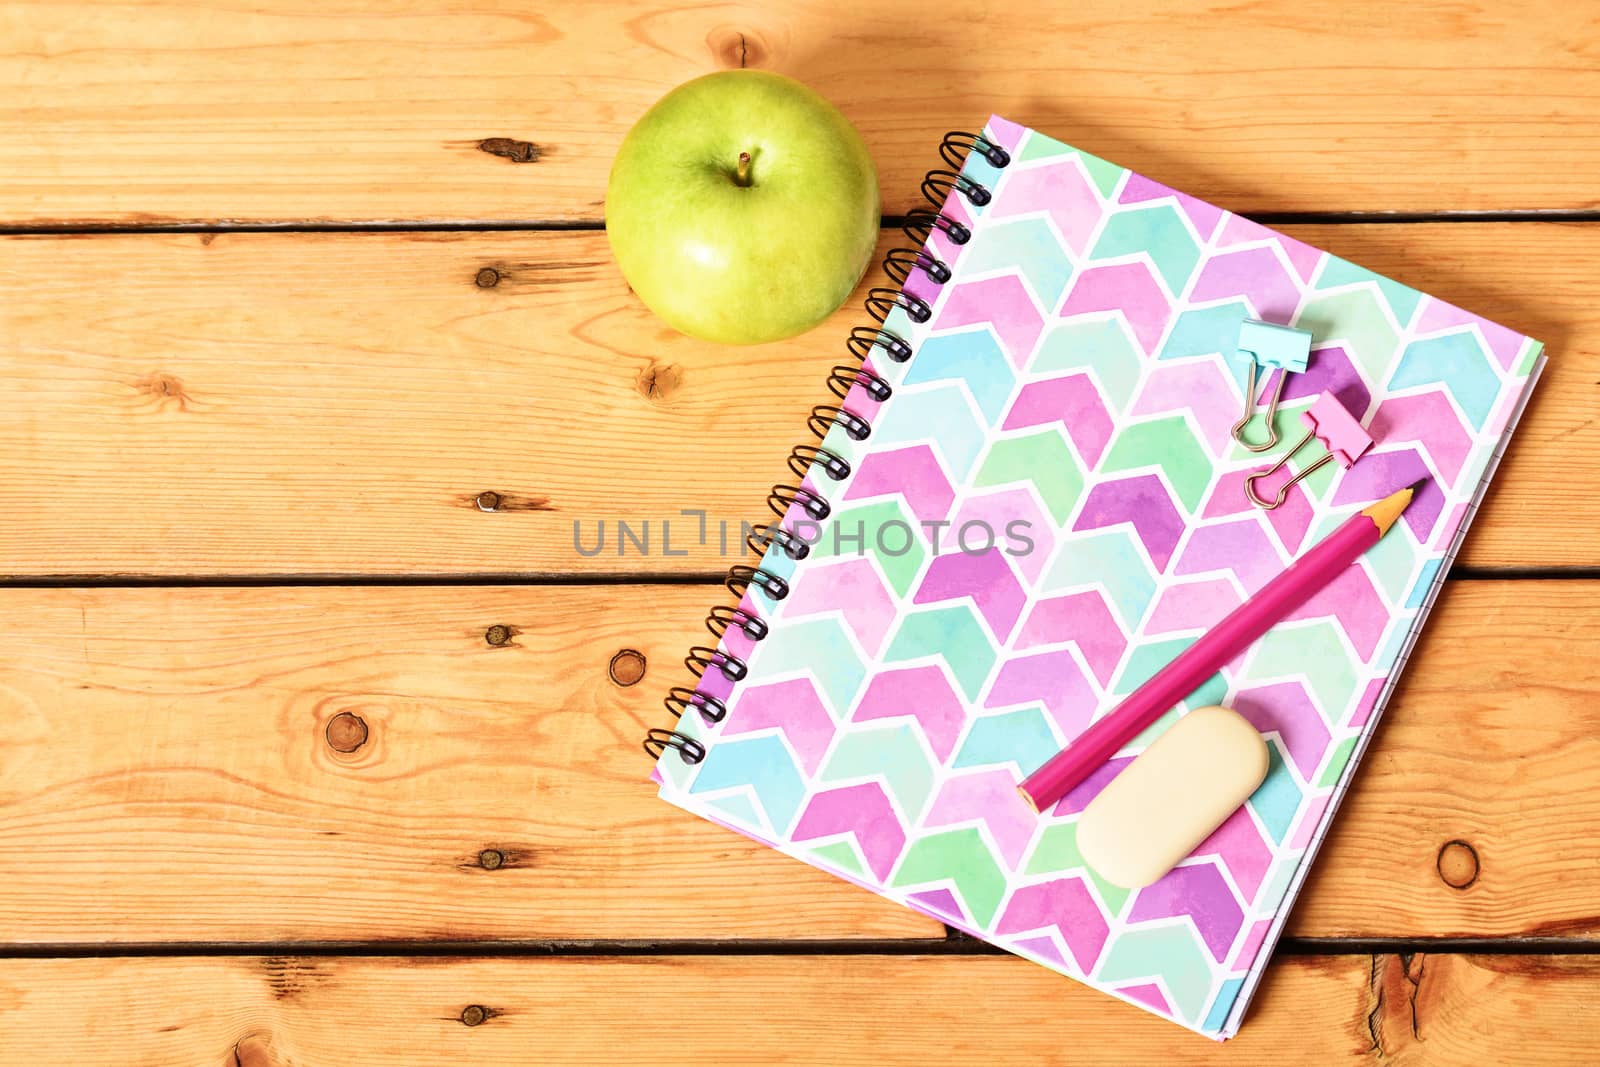 Pink notebook and apple on wooden background by Mendelex